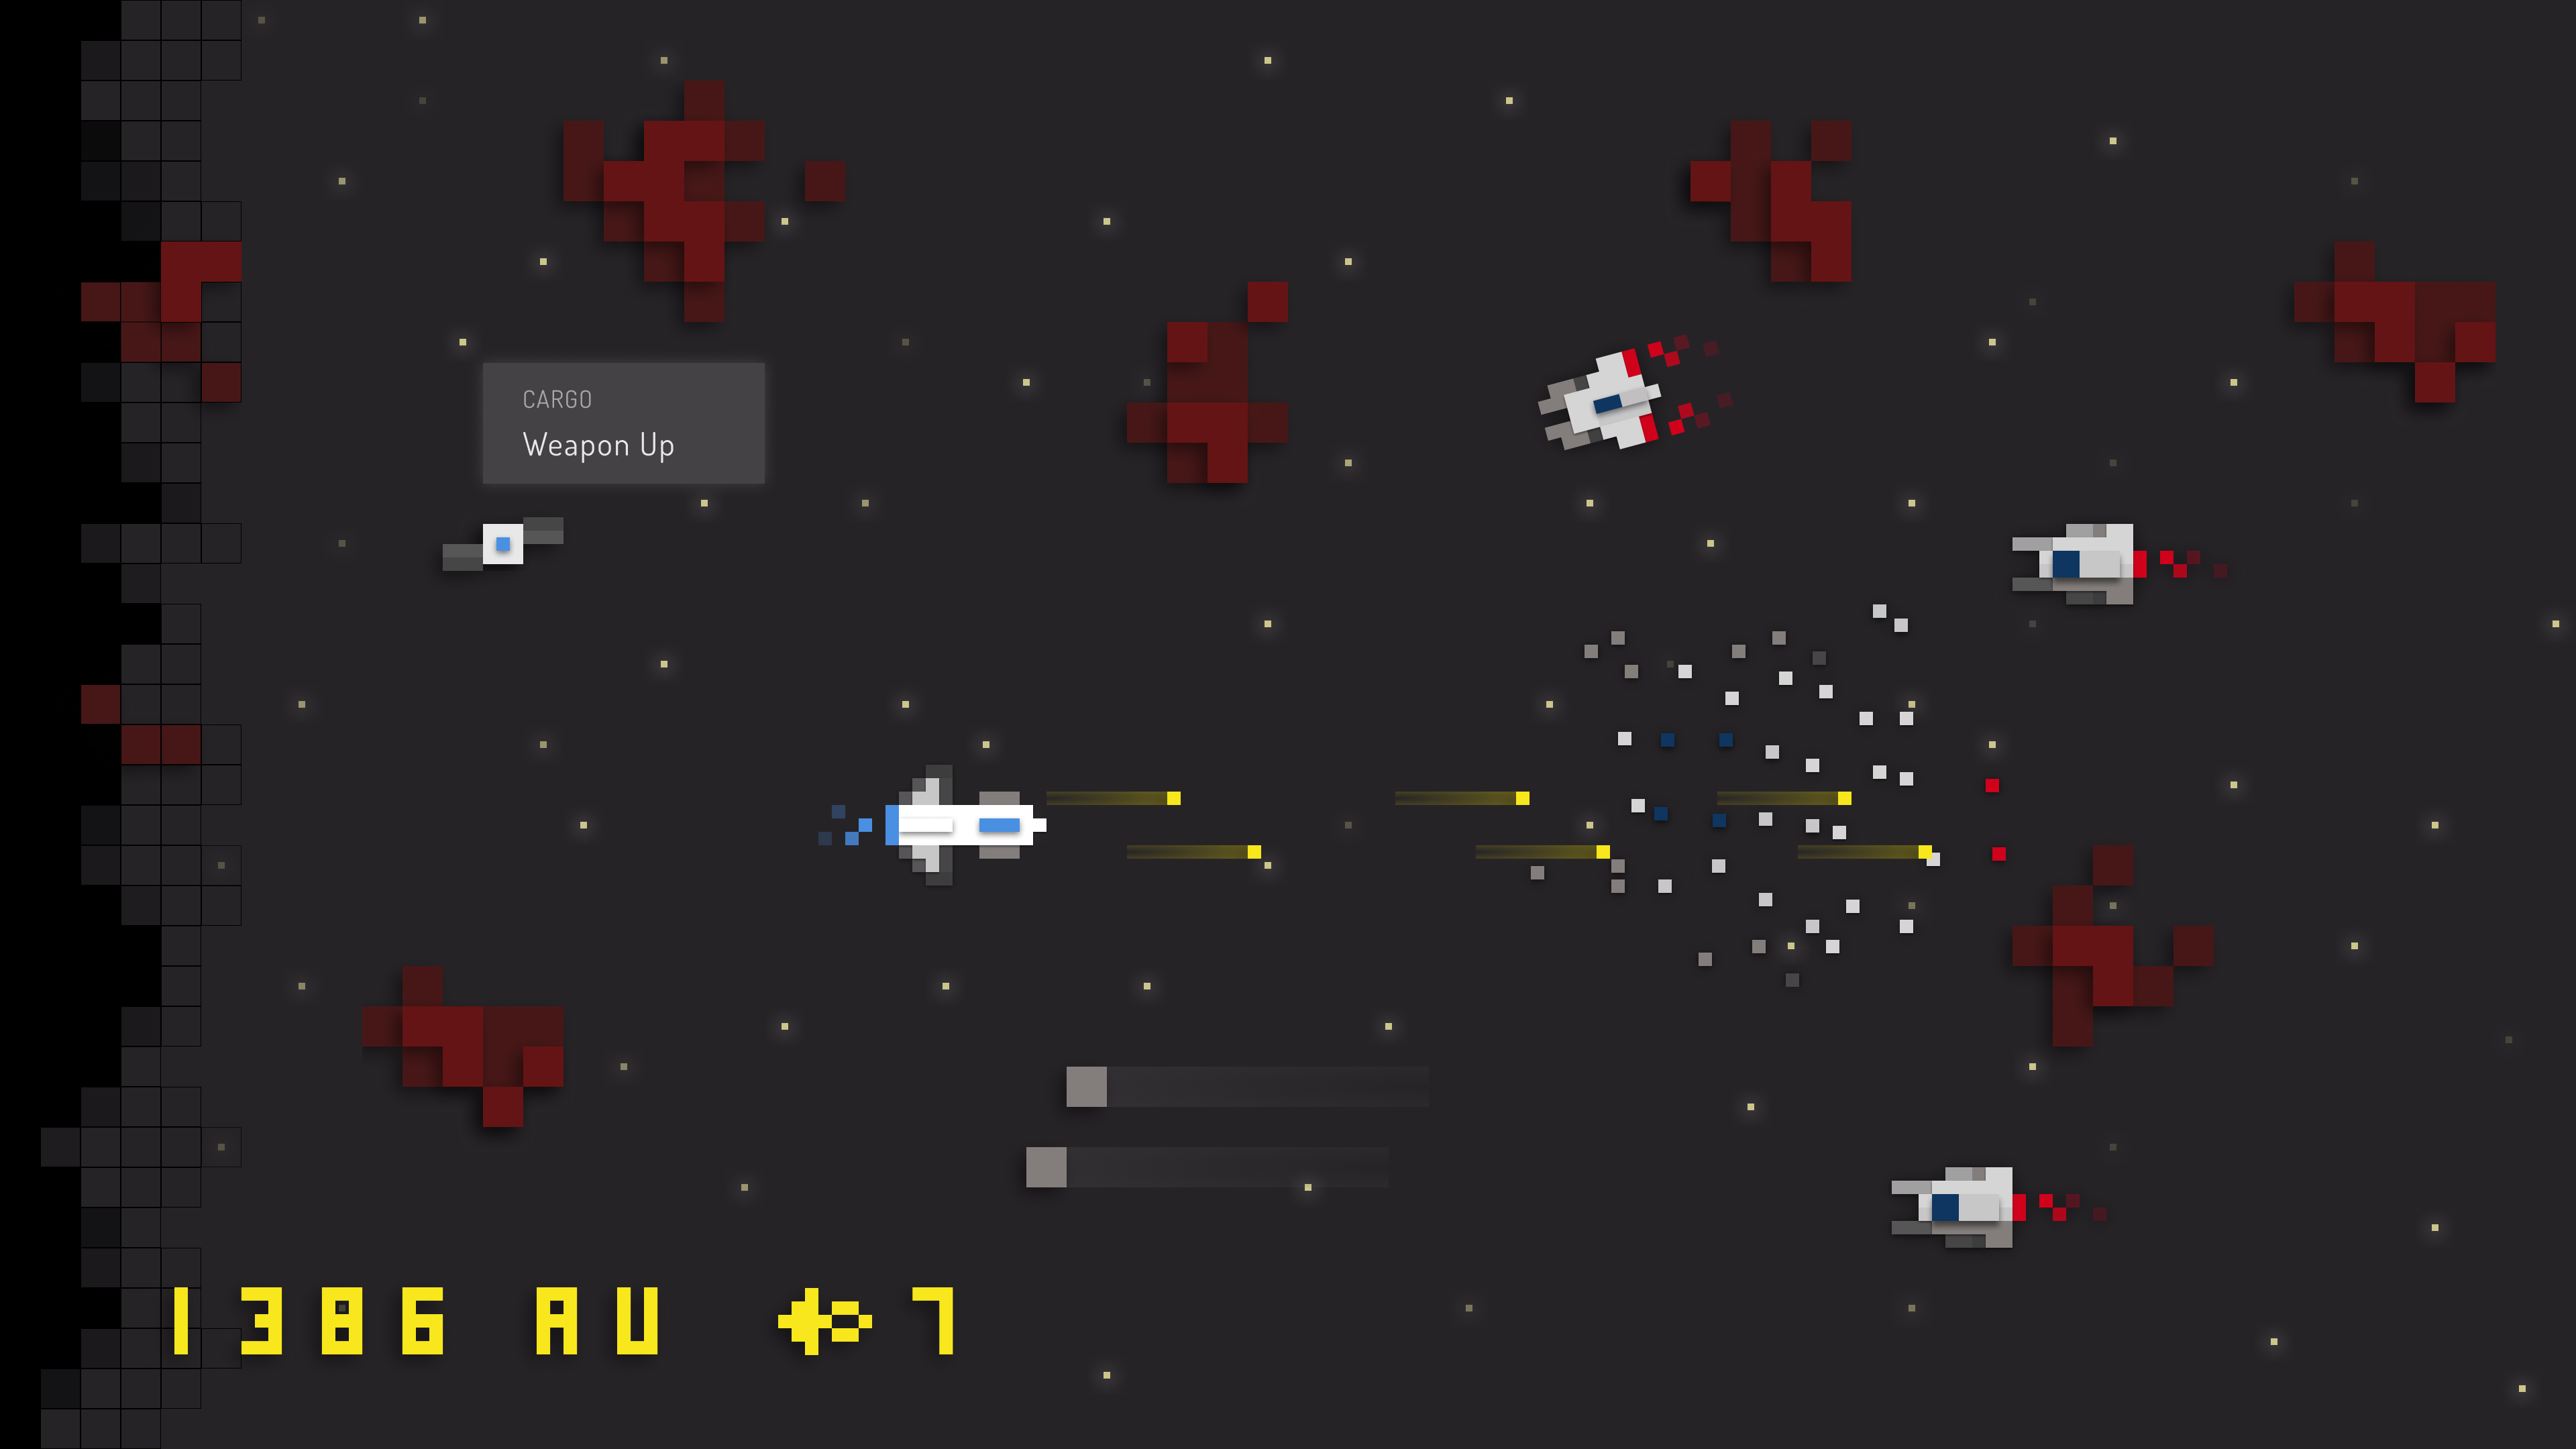 Mockup of the gameplay